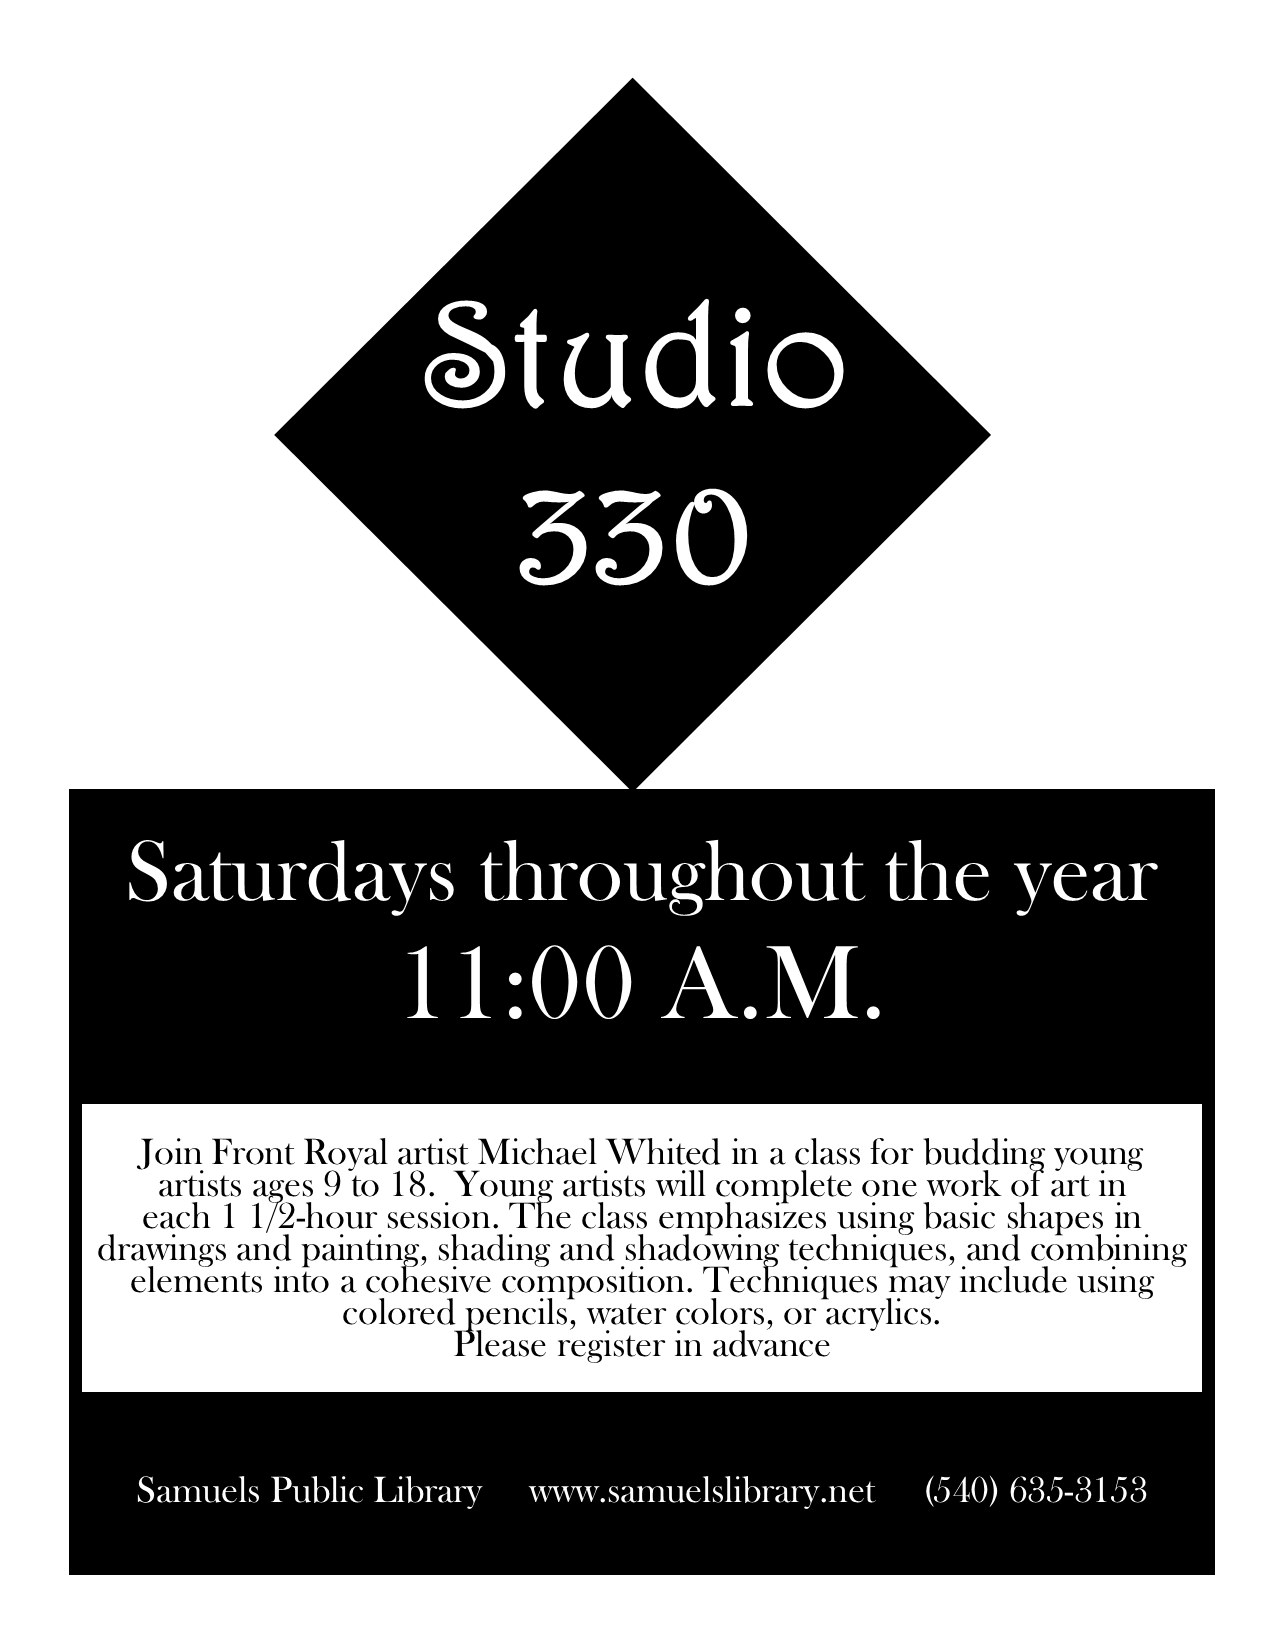 Studio 330 for ages 9-18